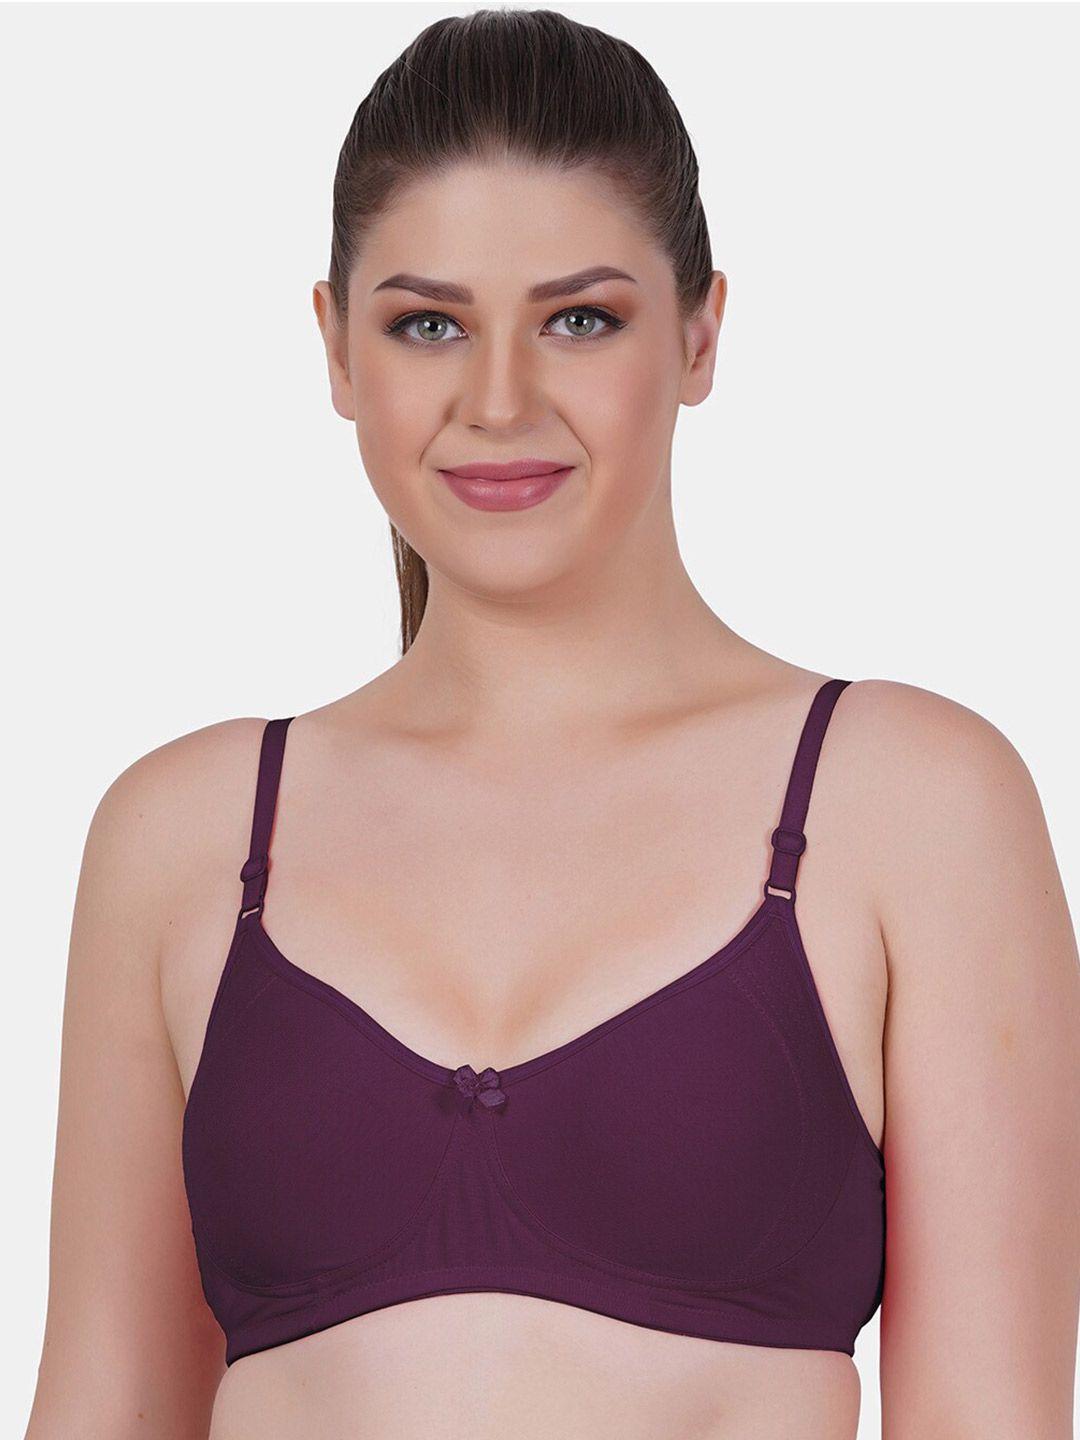 reveira medium coverage non padded minimizer bra with all day comfort & dry fit